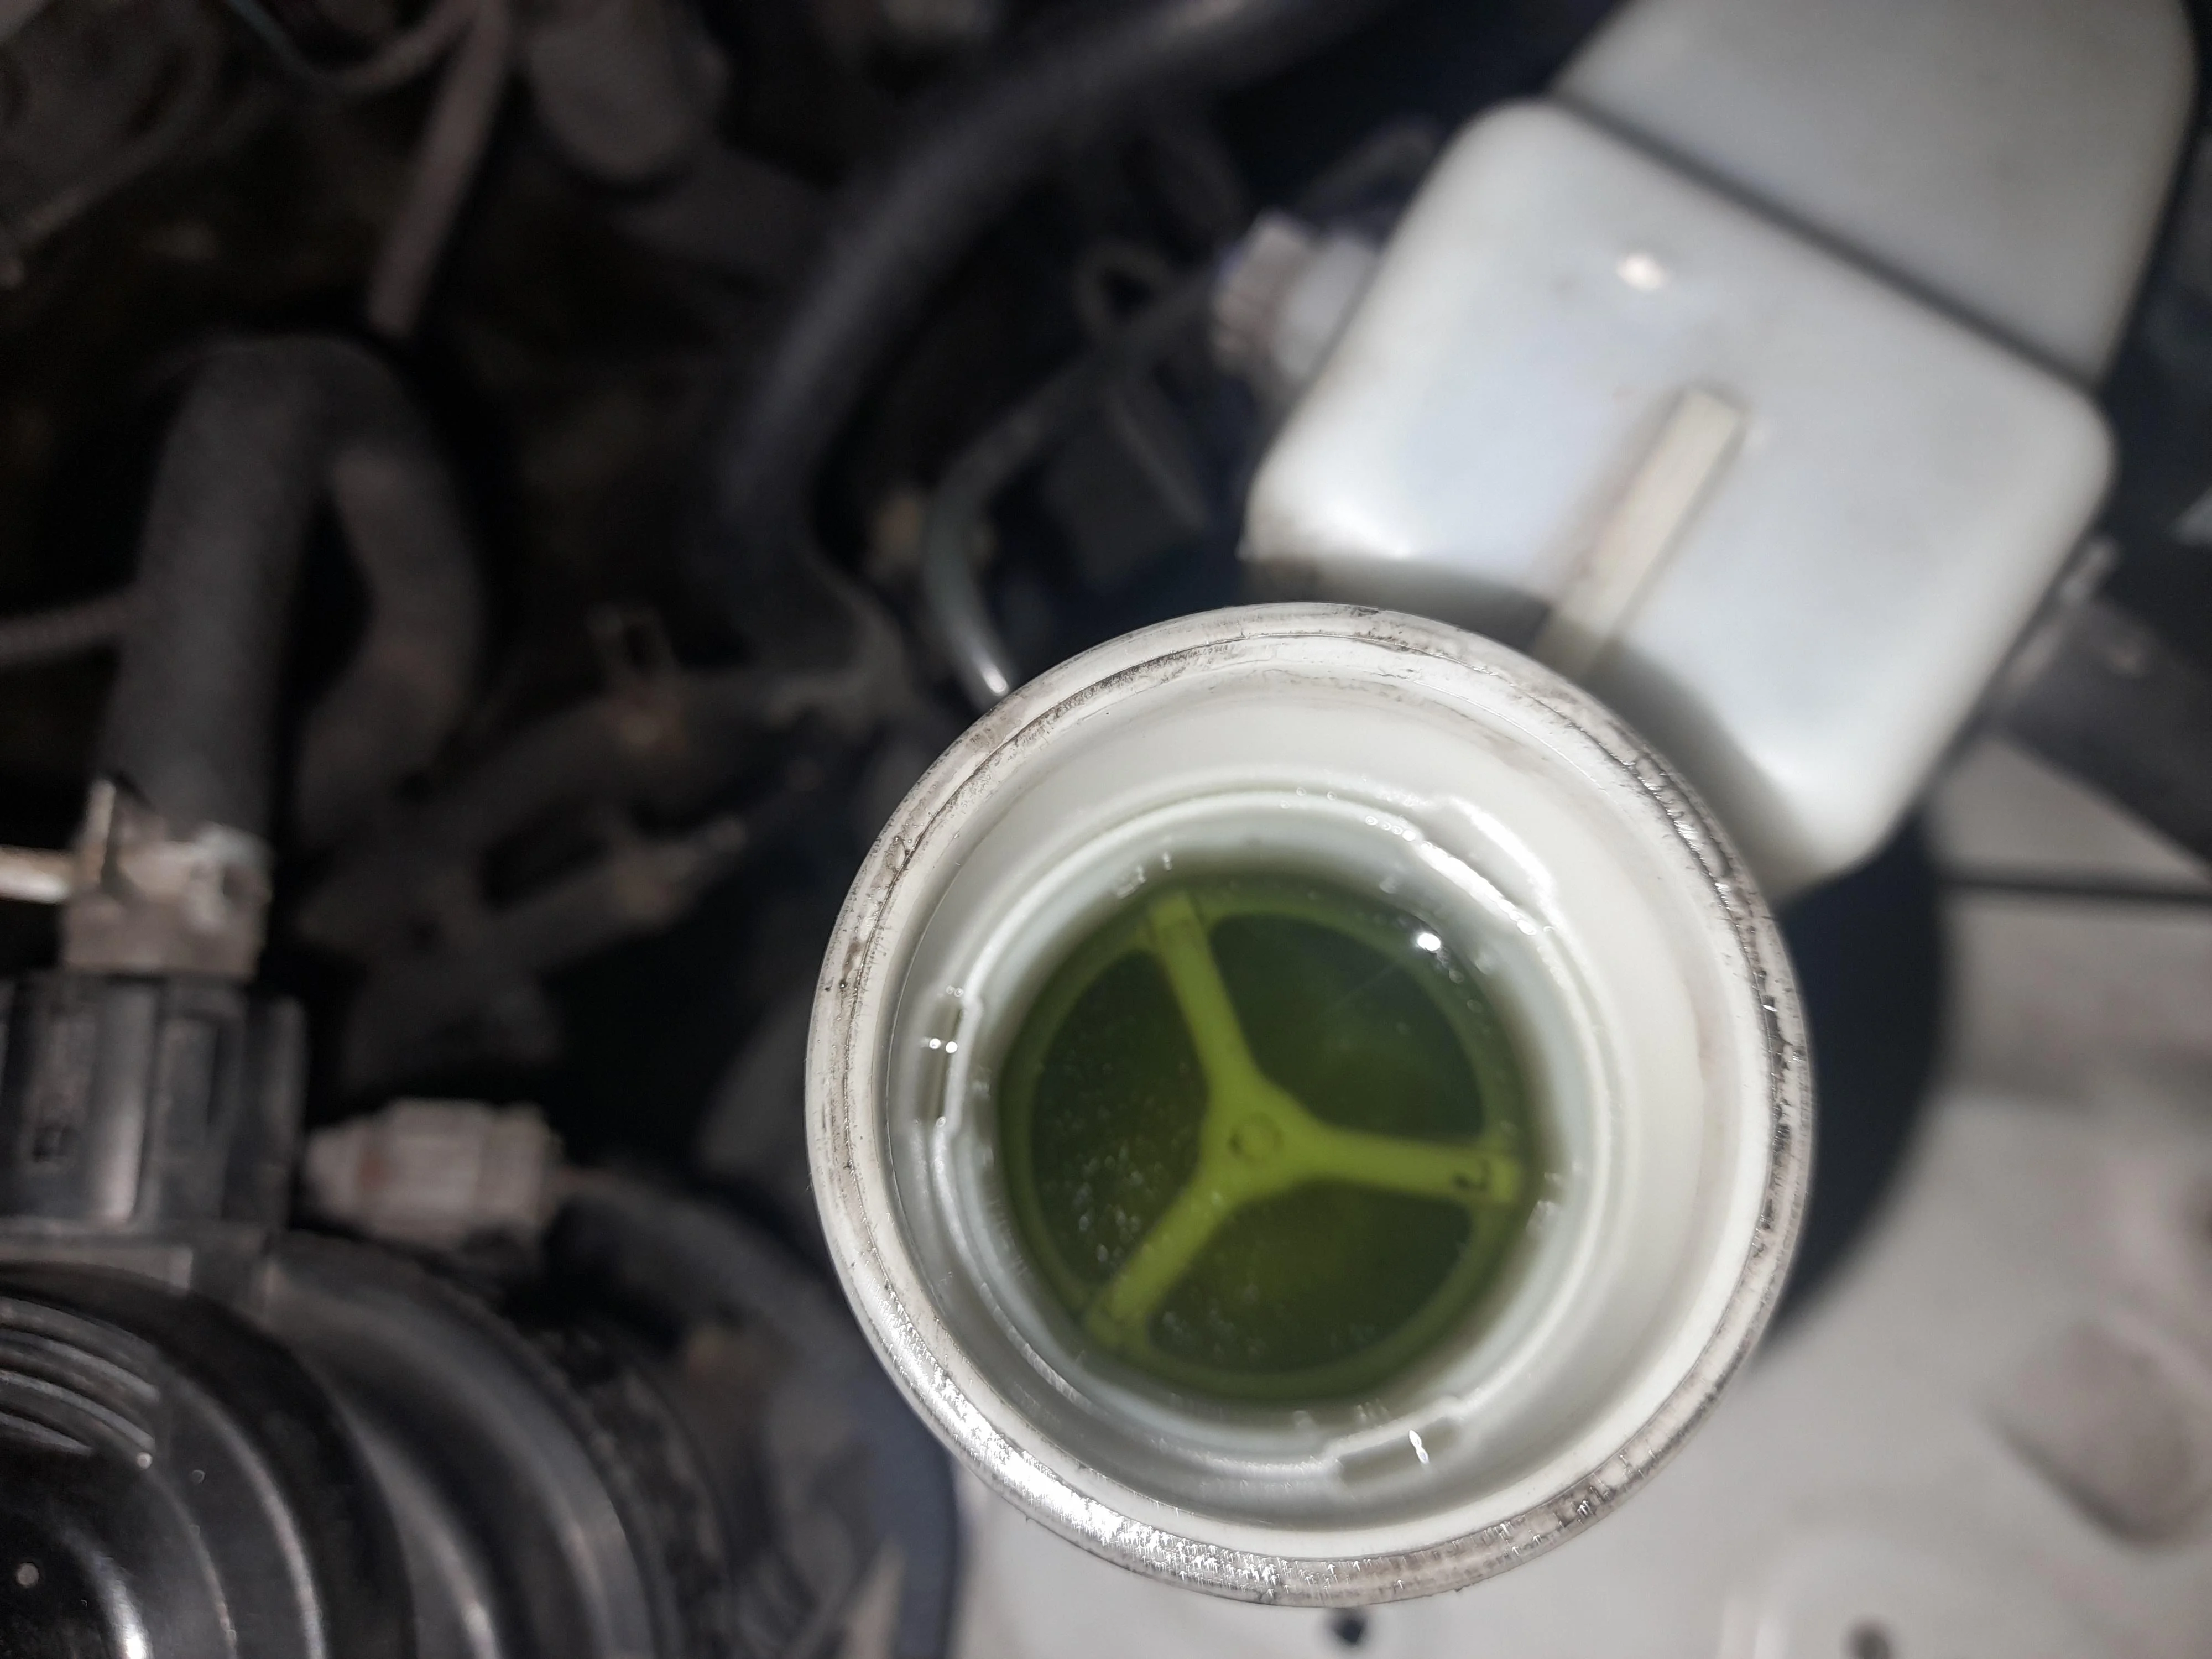 Why Is My Brake Fluid Green? Causes, Concerns, and Solutions